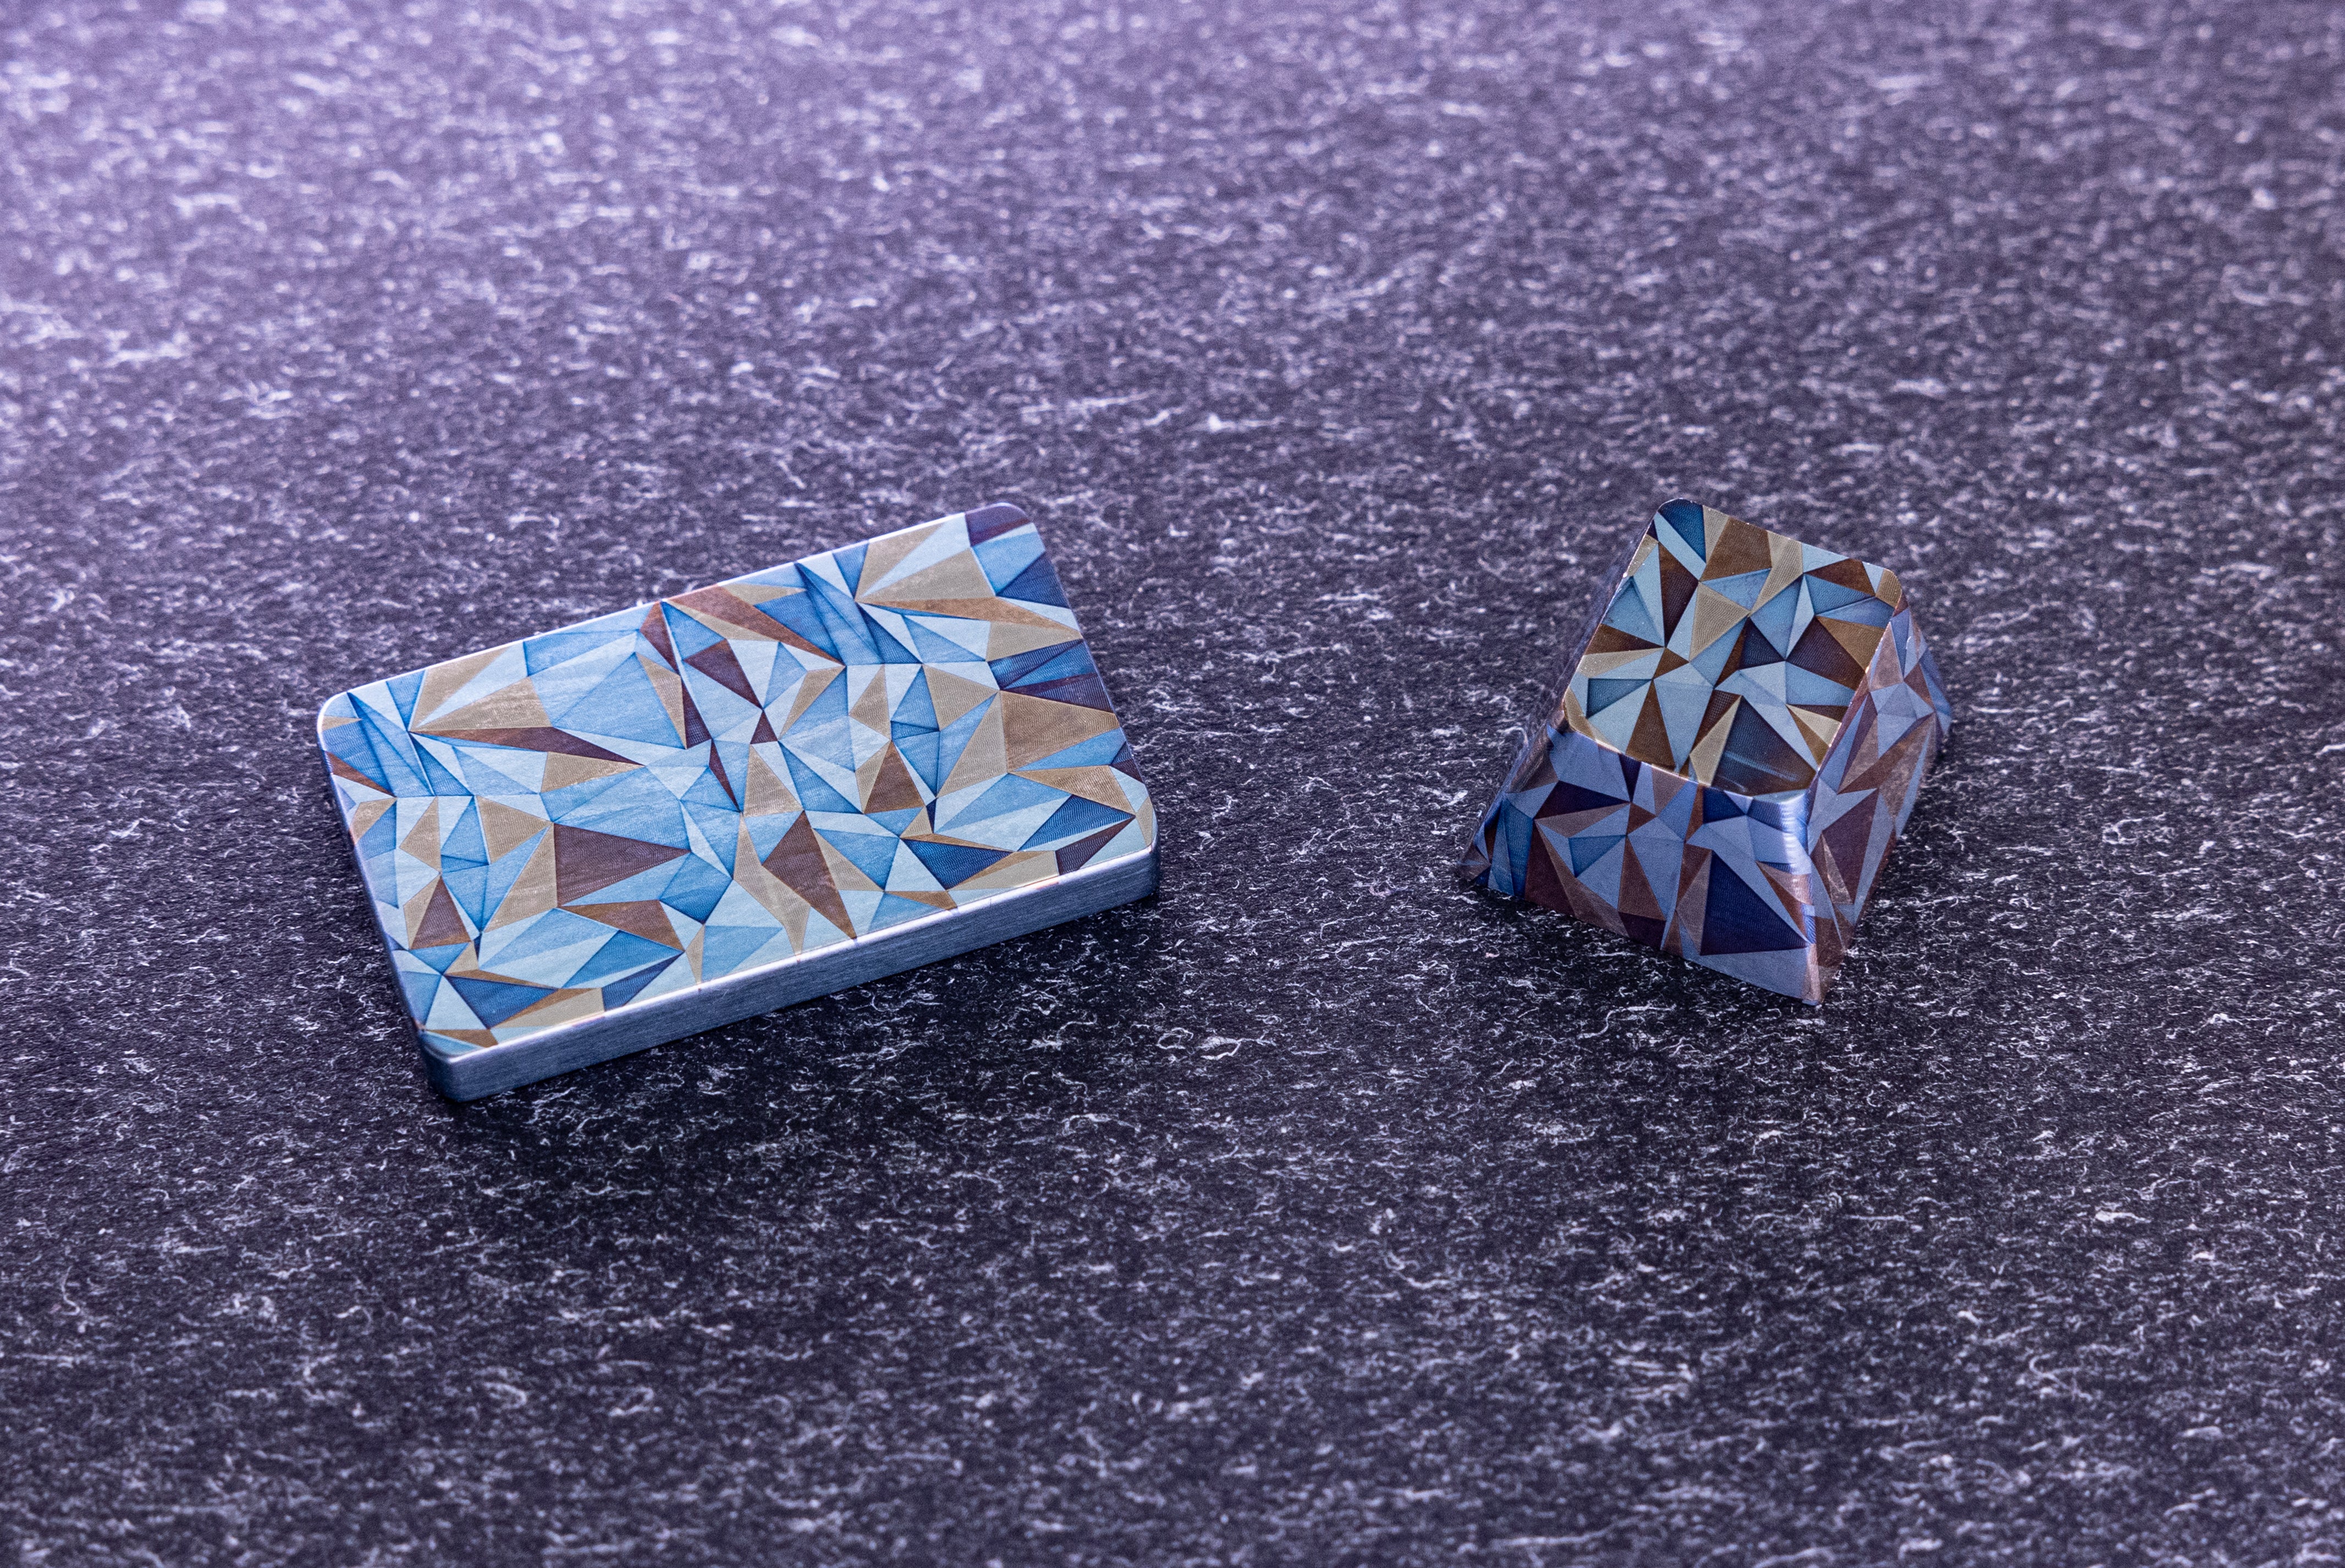 [Ended] Titanium Keycap and Badge